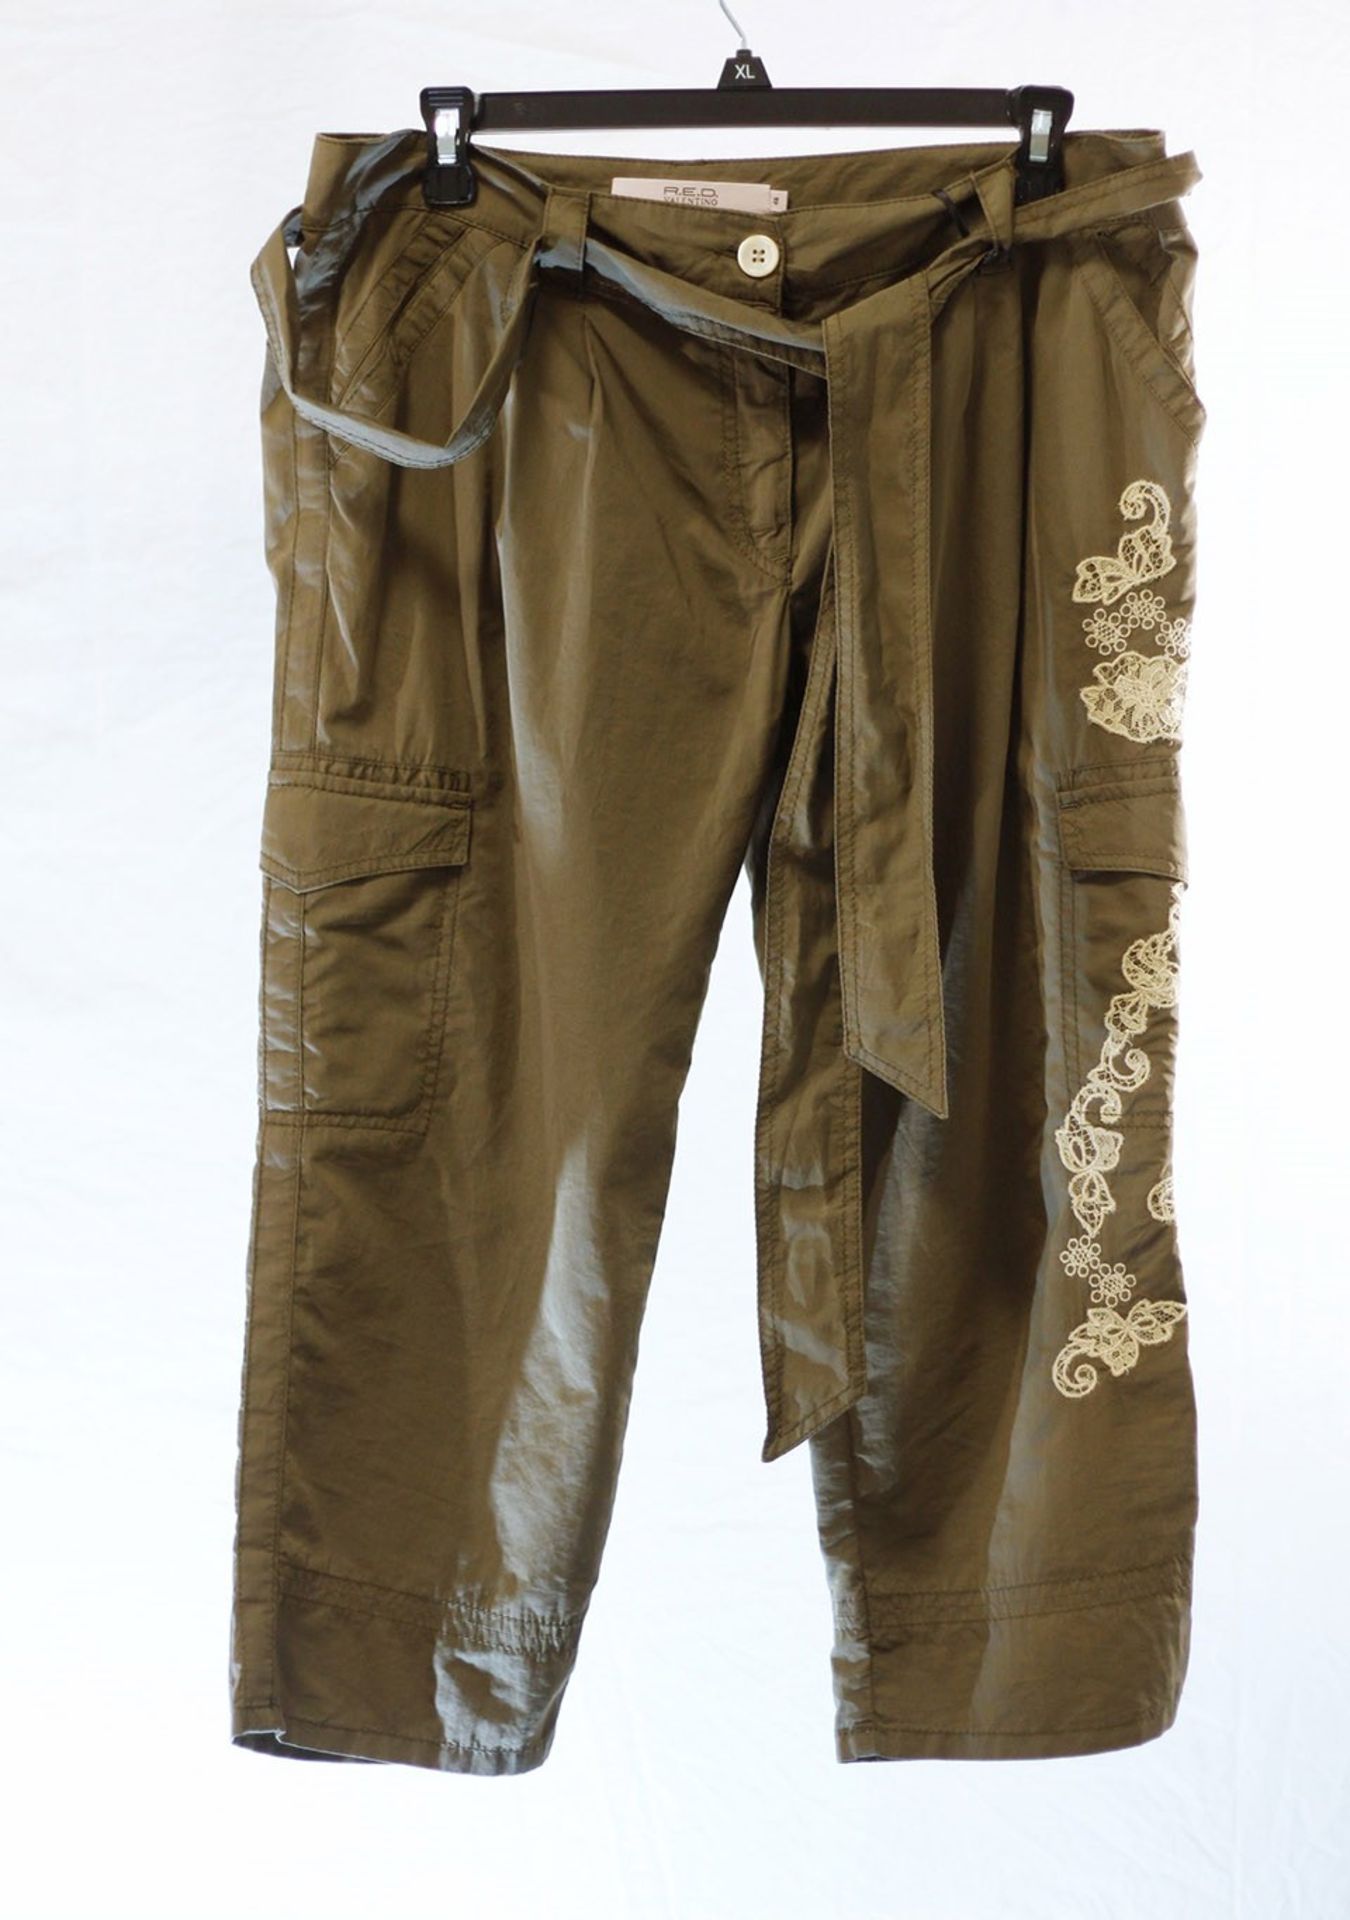 1 x Valentino Red Khaki 3/4 Length Trousers - Size: 16 - Material: 78% Cotton, 22% Silk - From a